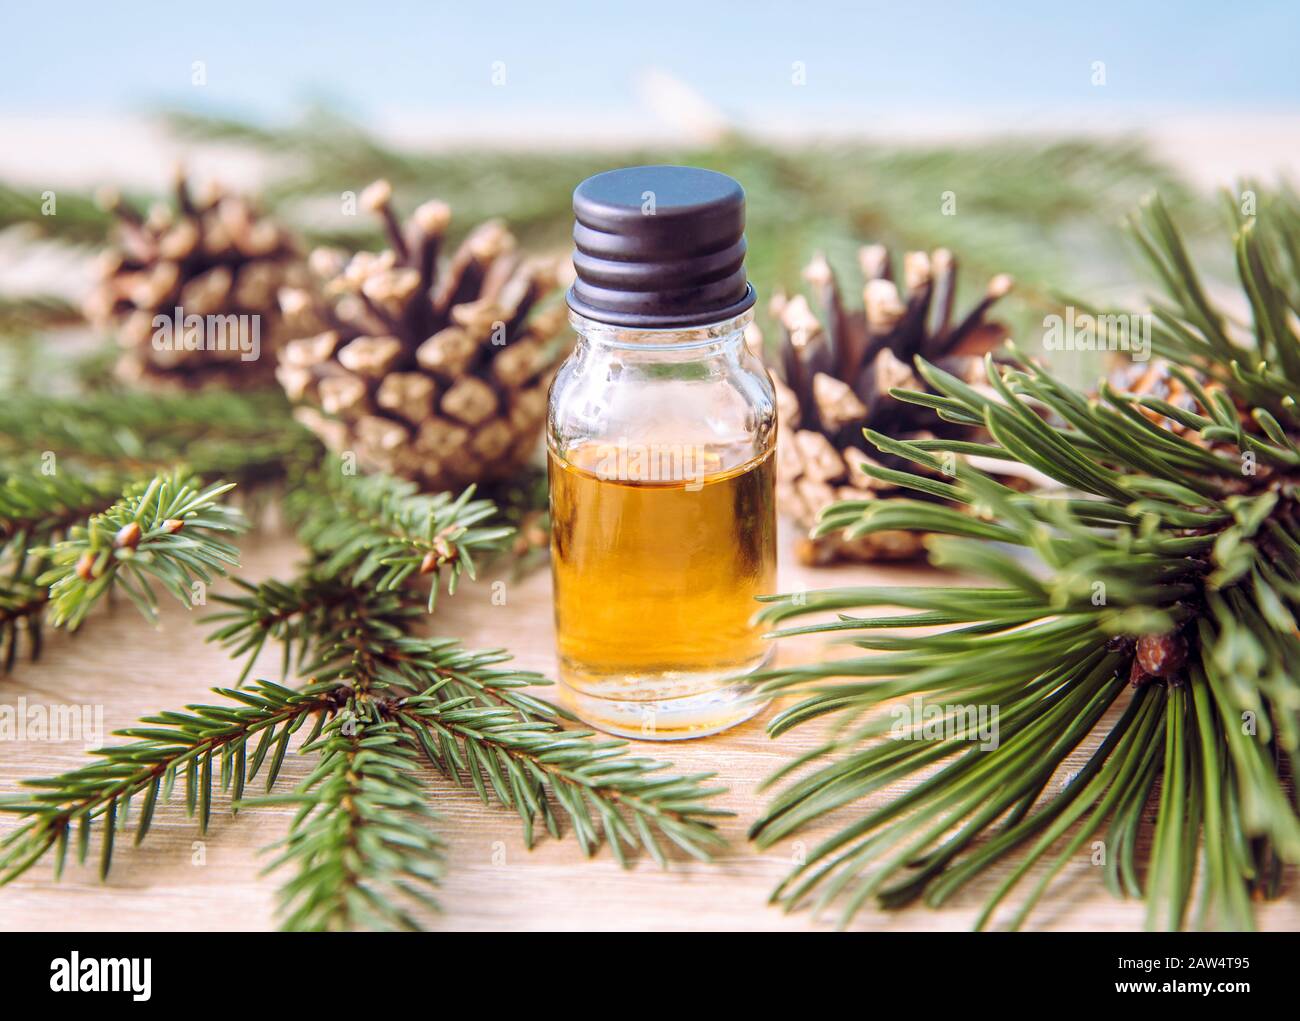 Pine and fir tree aroma oil bottle with pine tree and fir tree branches for decoration on lights wooden background. Essential oil concept. Stock Photo